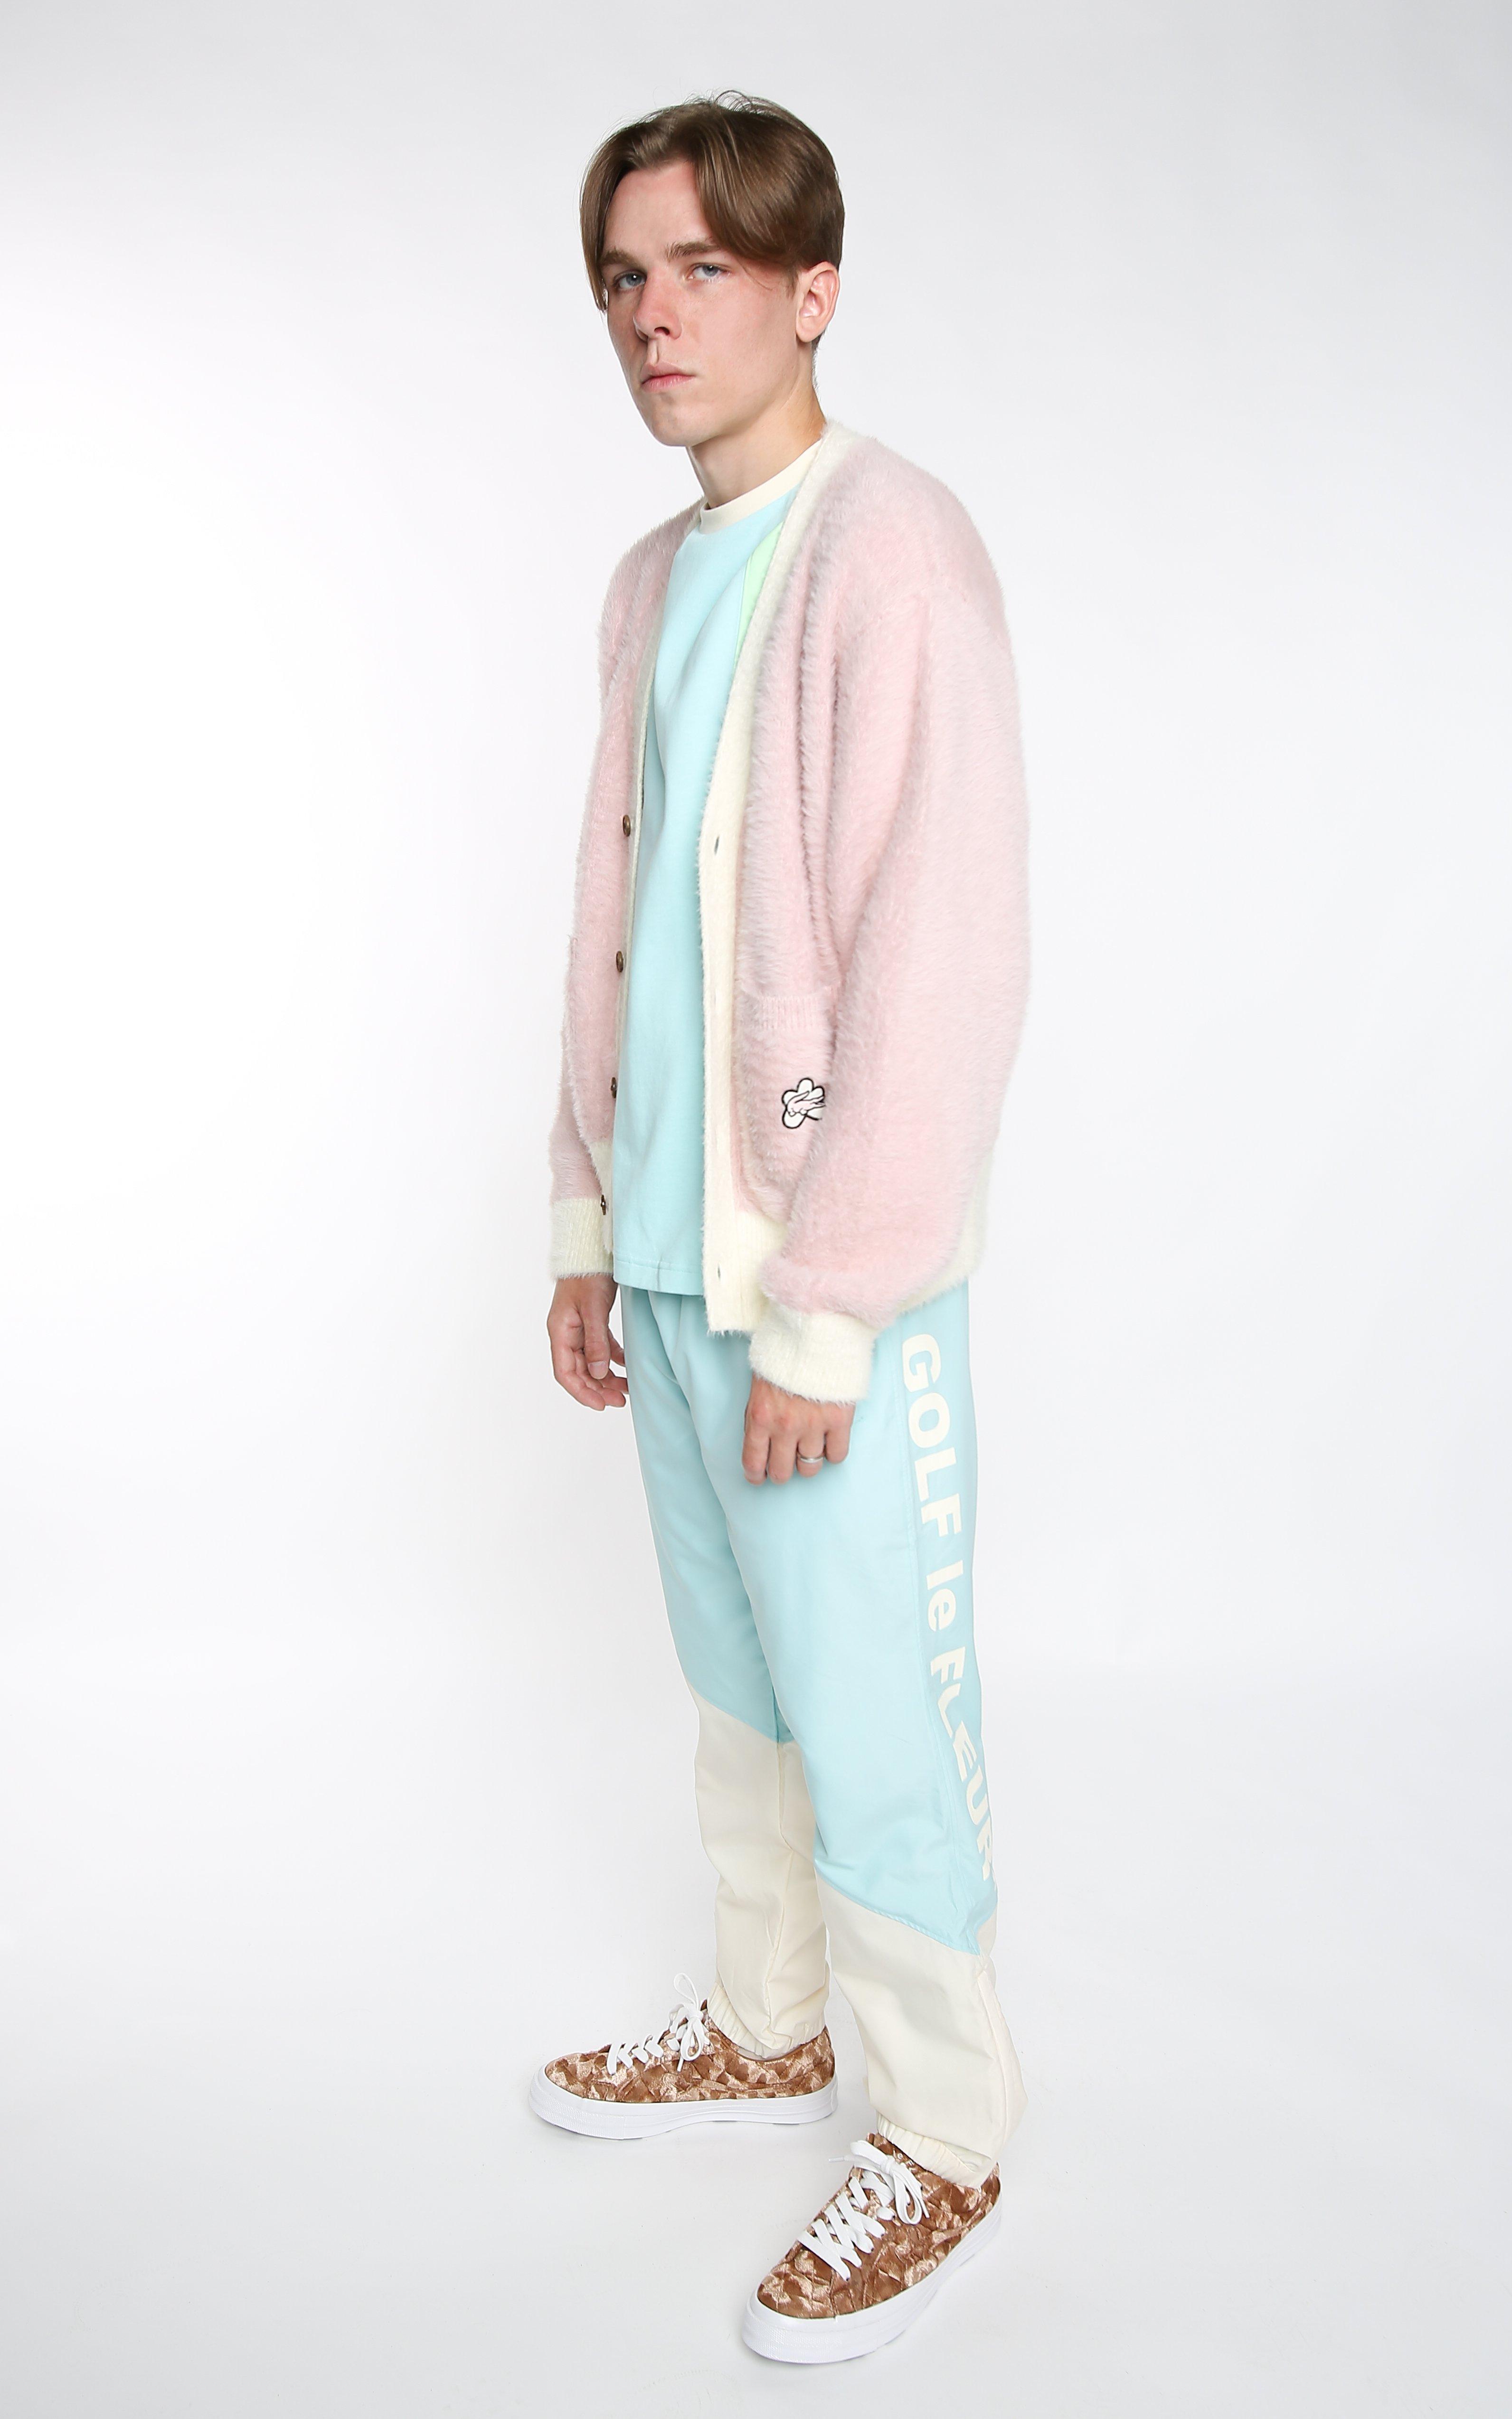 Lacoste Synthetic Golf Le Fleur* X Cardigan in Pink for Men - Lyst